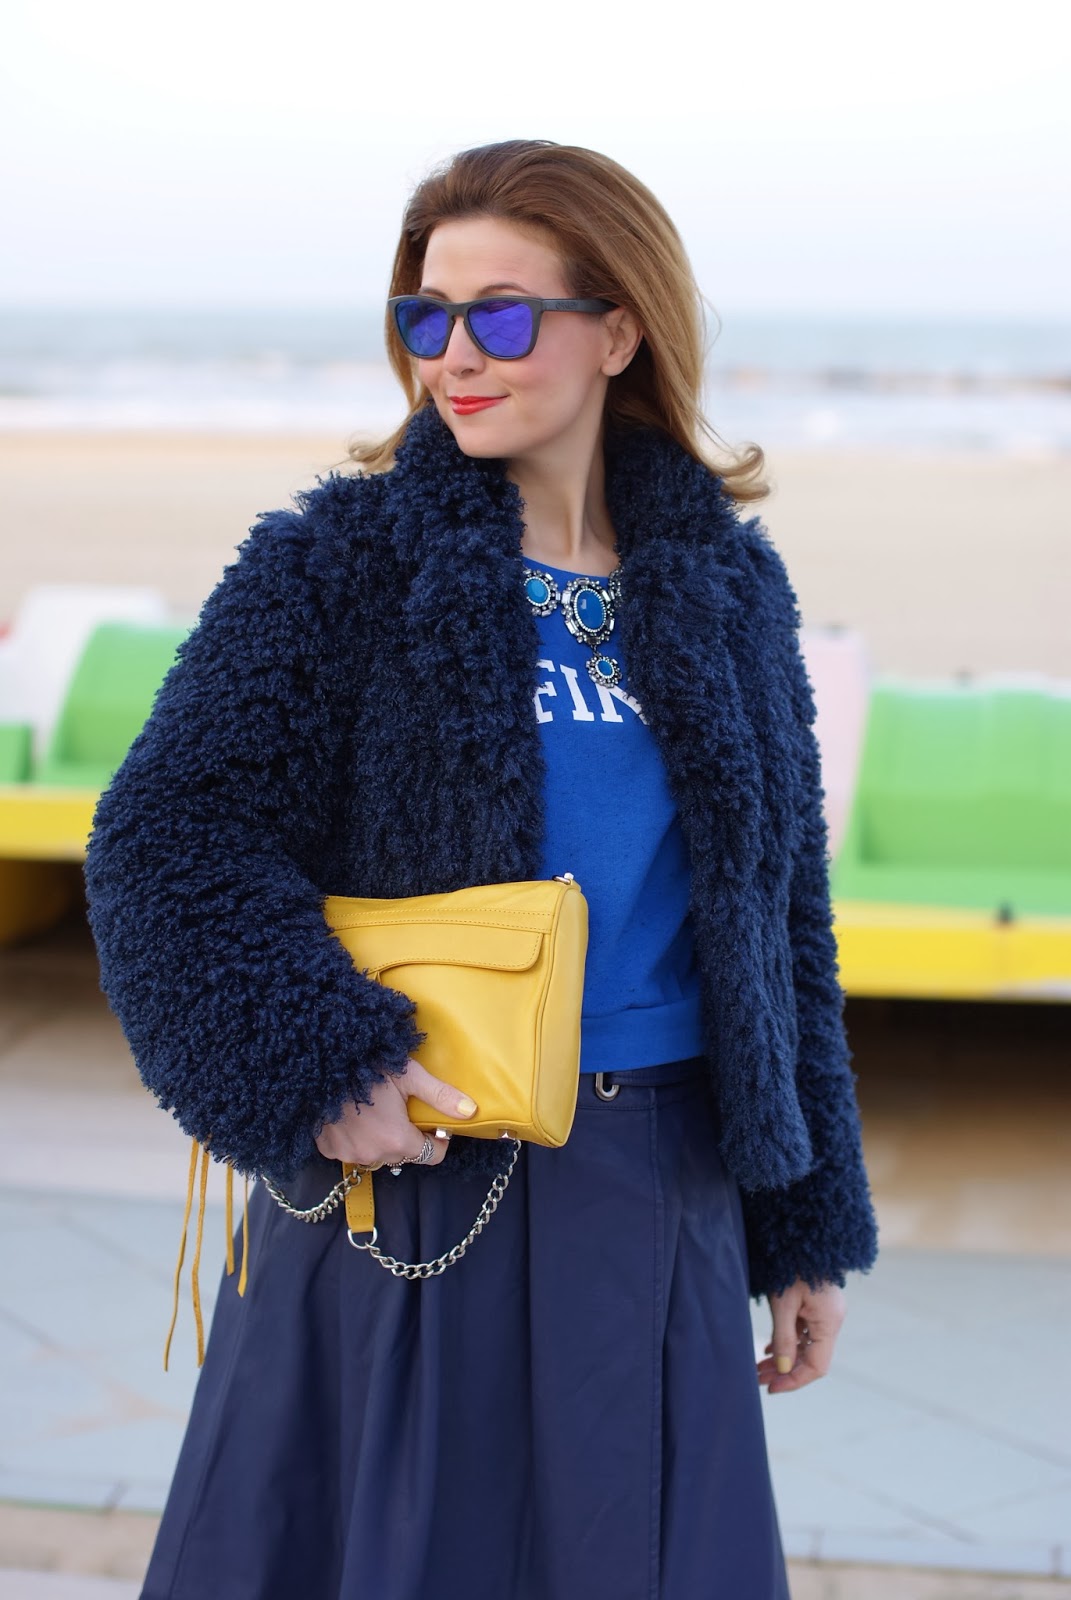 So Allure faux fur jacket, Zara statement necklace, Infinity sweatshirt, Fashion and Cookies, fashion blogger